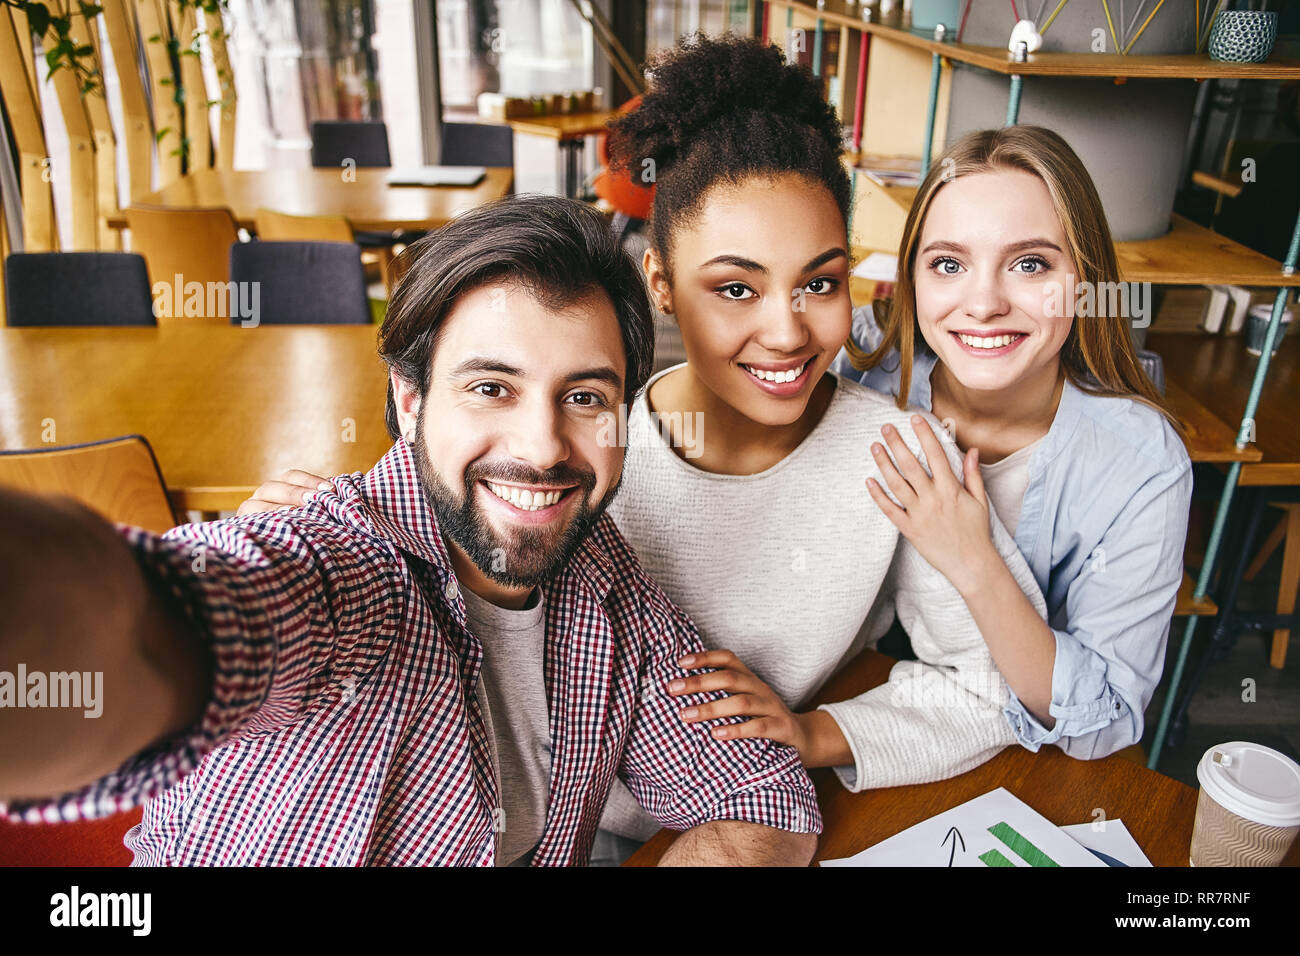 Three laughing young business people in casual wear smile to make shot of themselves. Office interior, bookshelves in the background. Concept of success Stock Photo